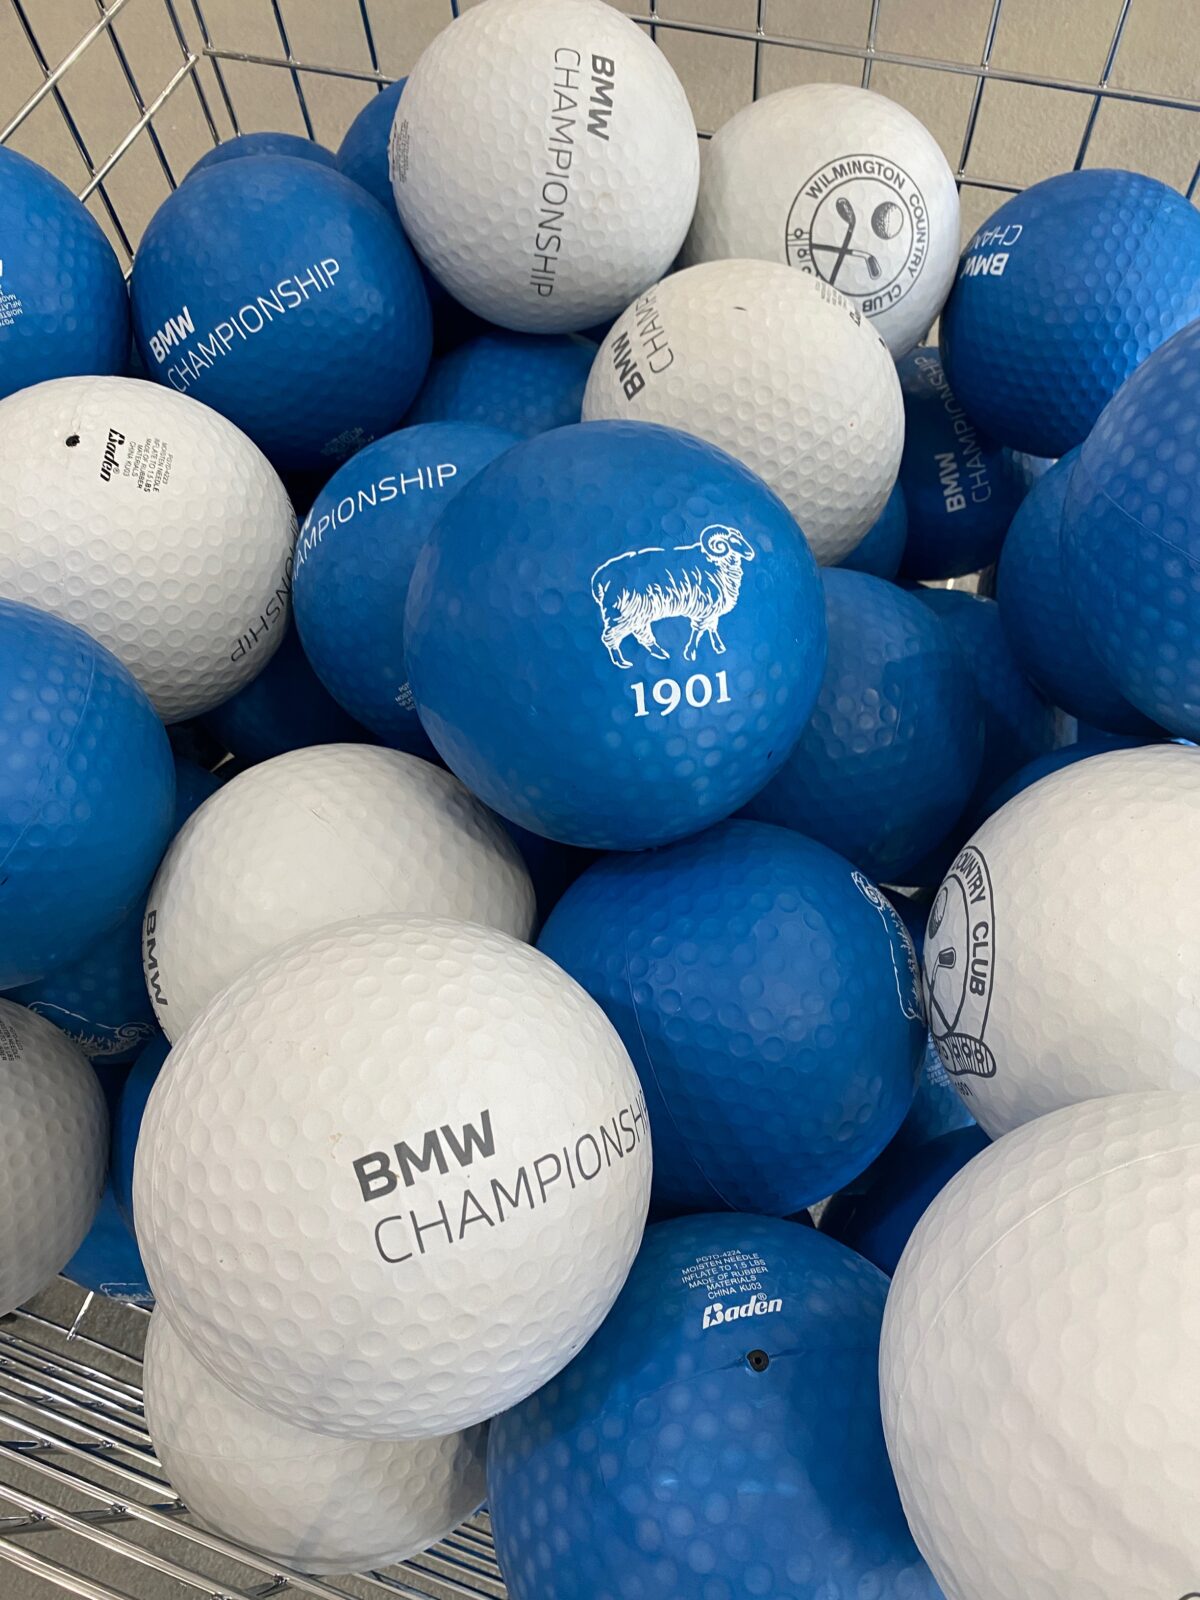 Merchandise at the BMW Championship is going fast (horrible pun intended)